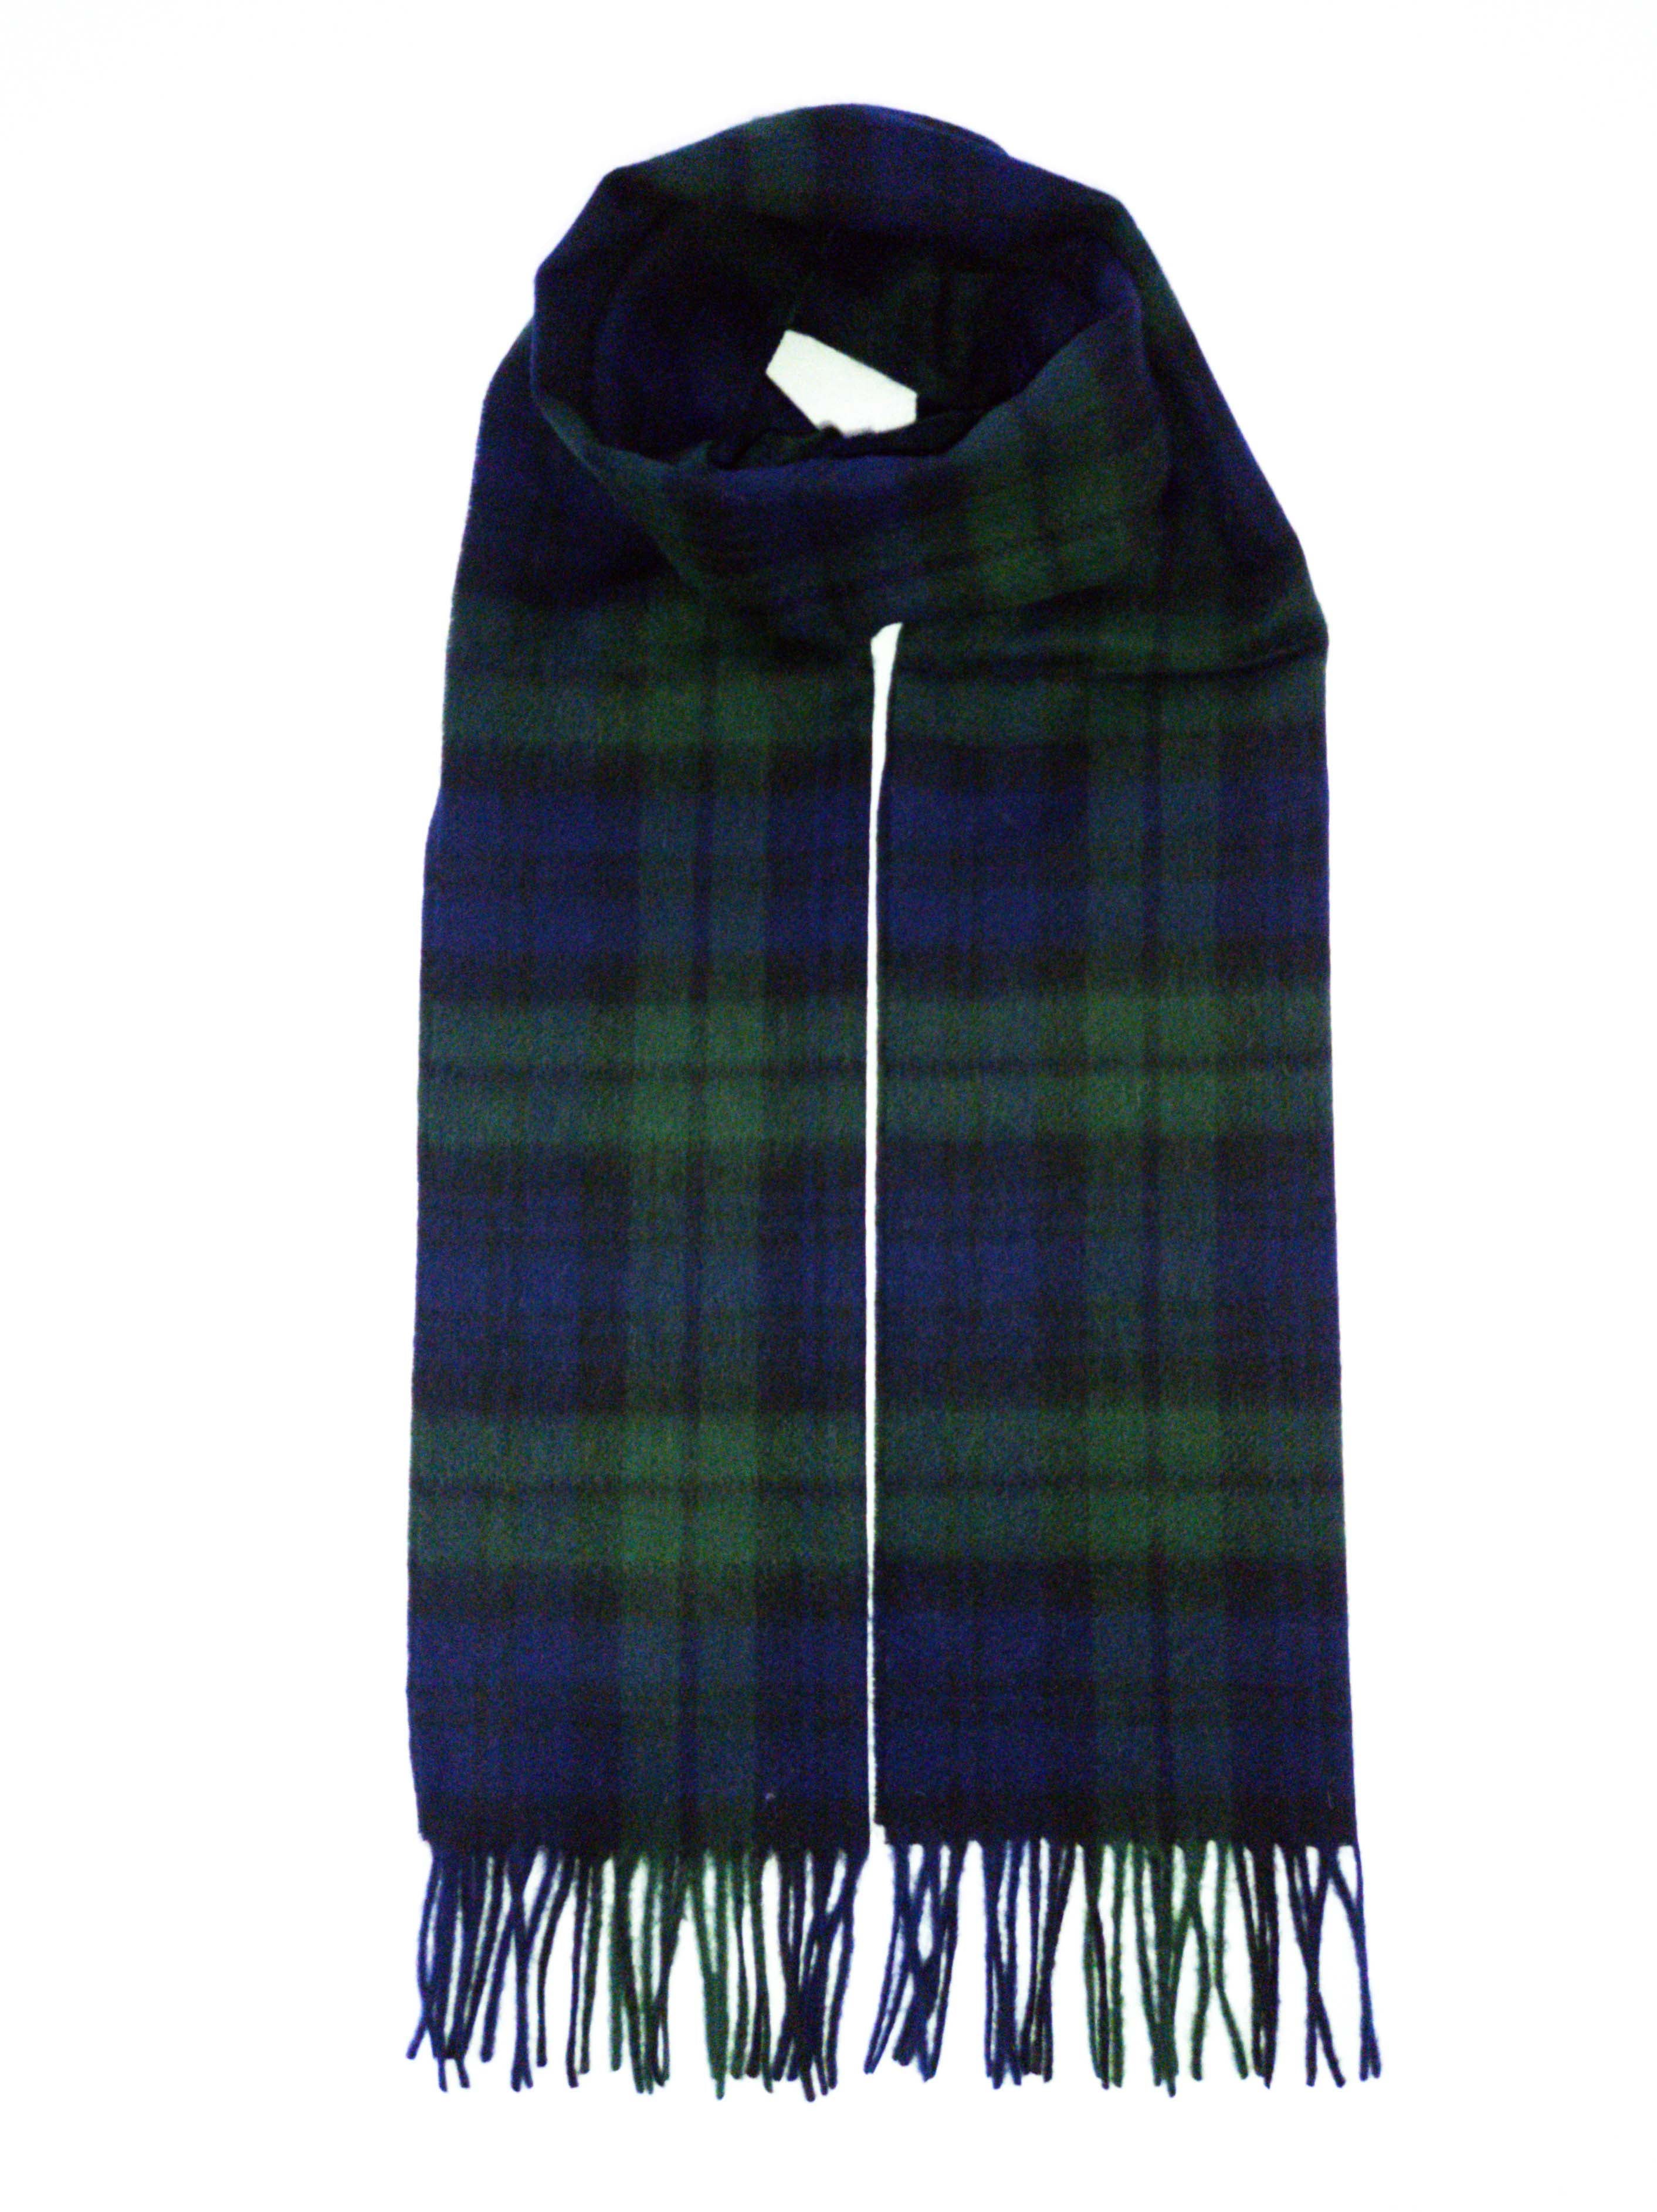 Blackwatch Lambswool Check Scarf - Oxford Blue